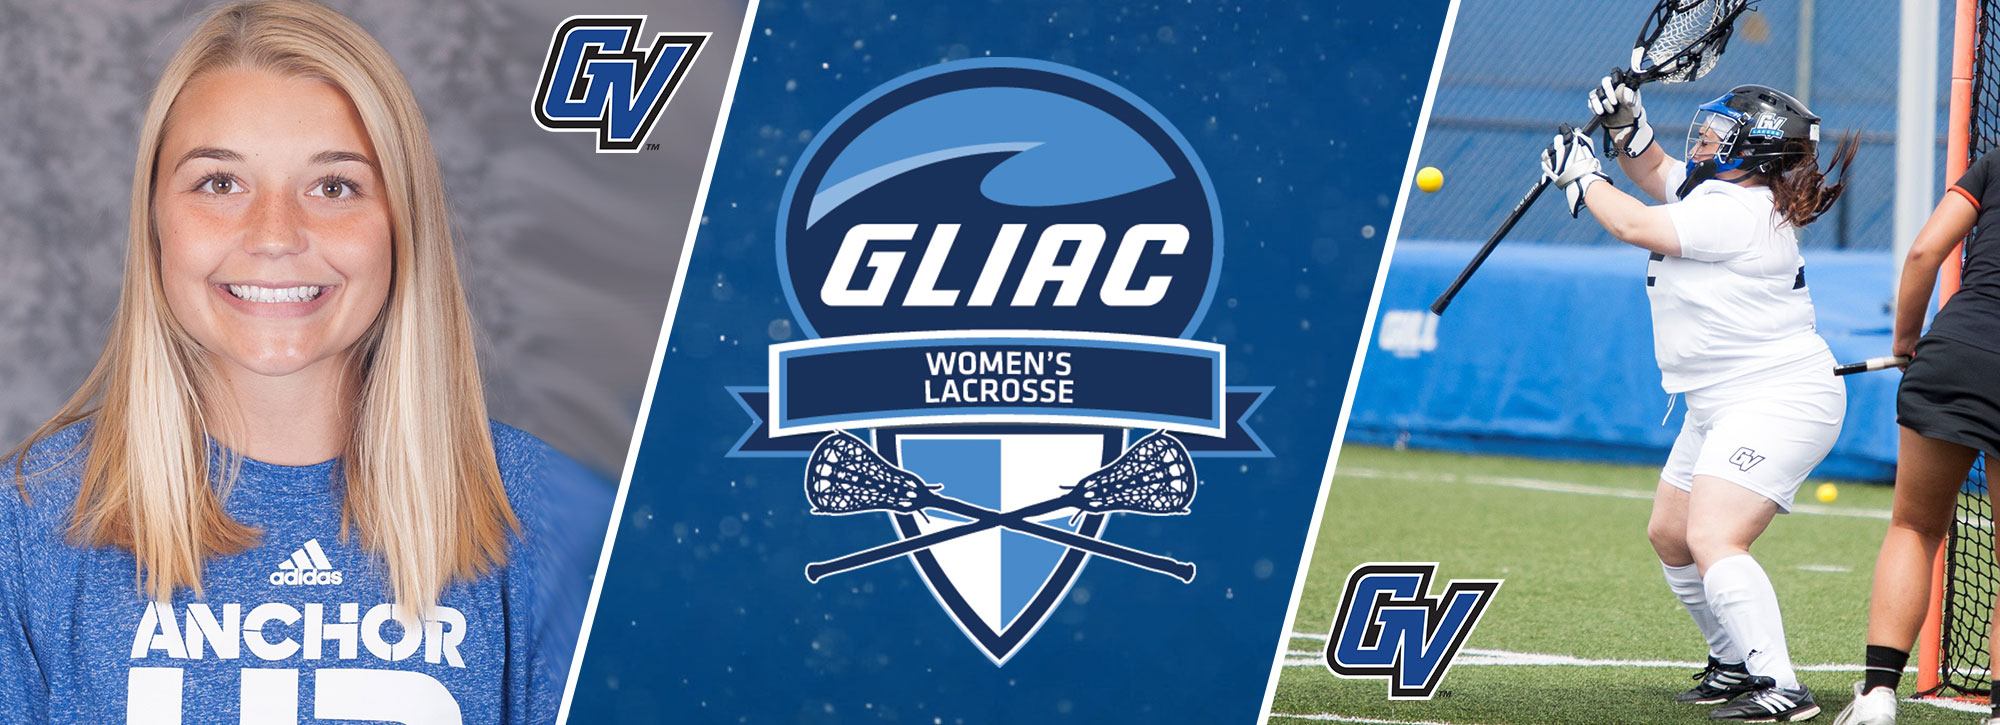 Grand Valley State Sweeps GLIAC Lacrosse Weekly Honors Against Pair of Top Opponents